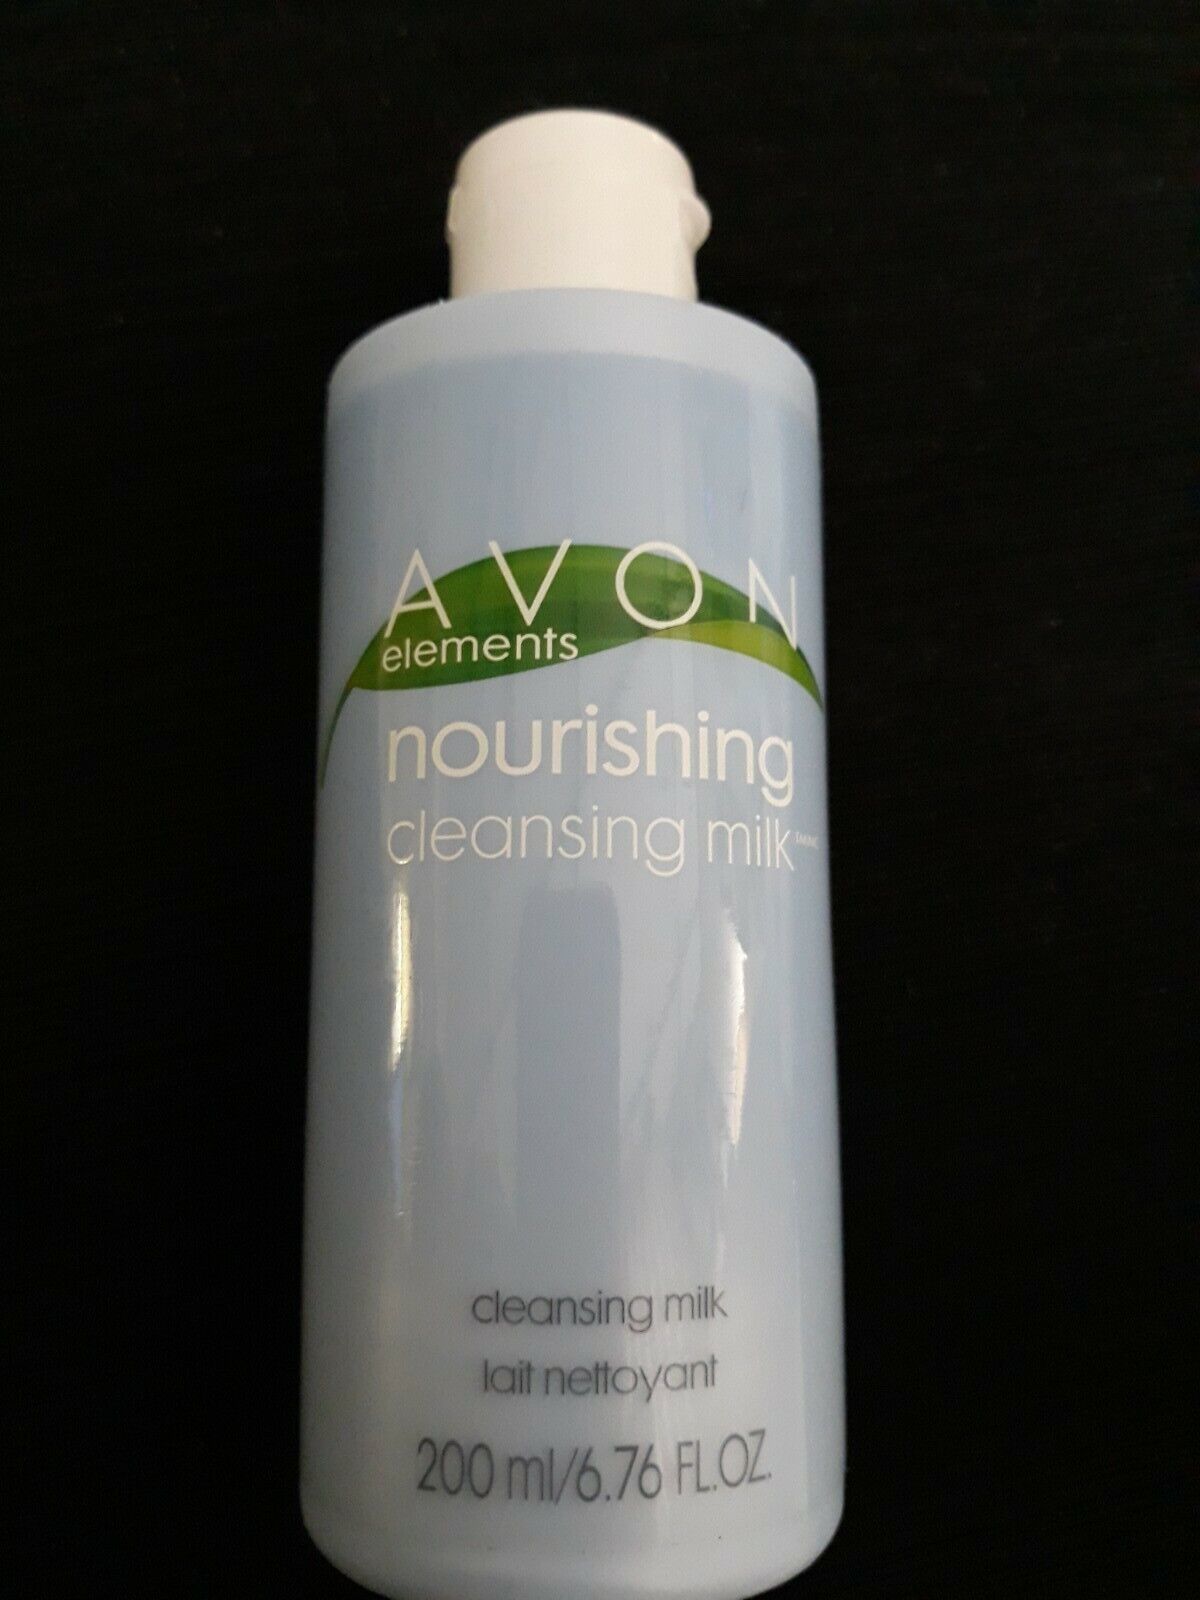 Primary image for Avon Elements Nourishing Cleansing Milk 6.76 fl oz - (Discontinued) - New!!!